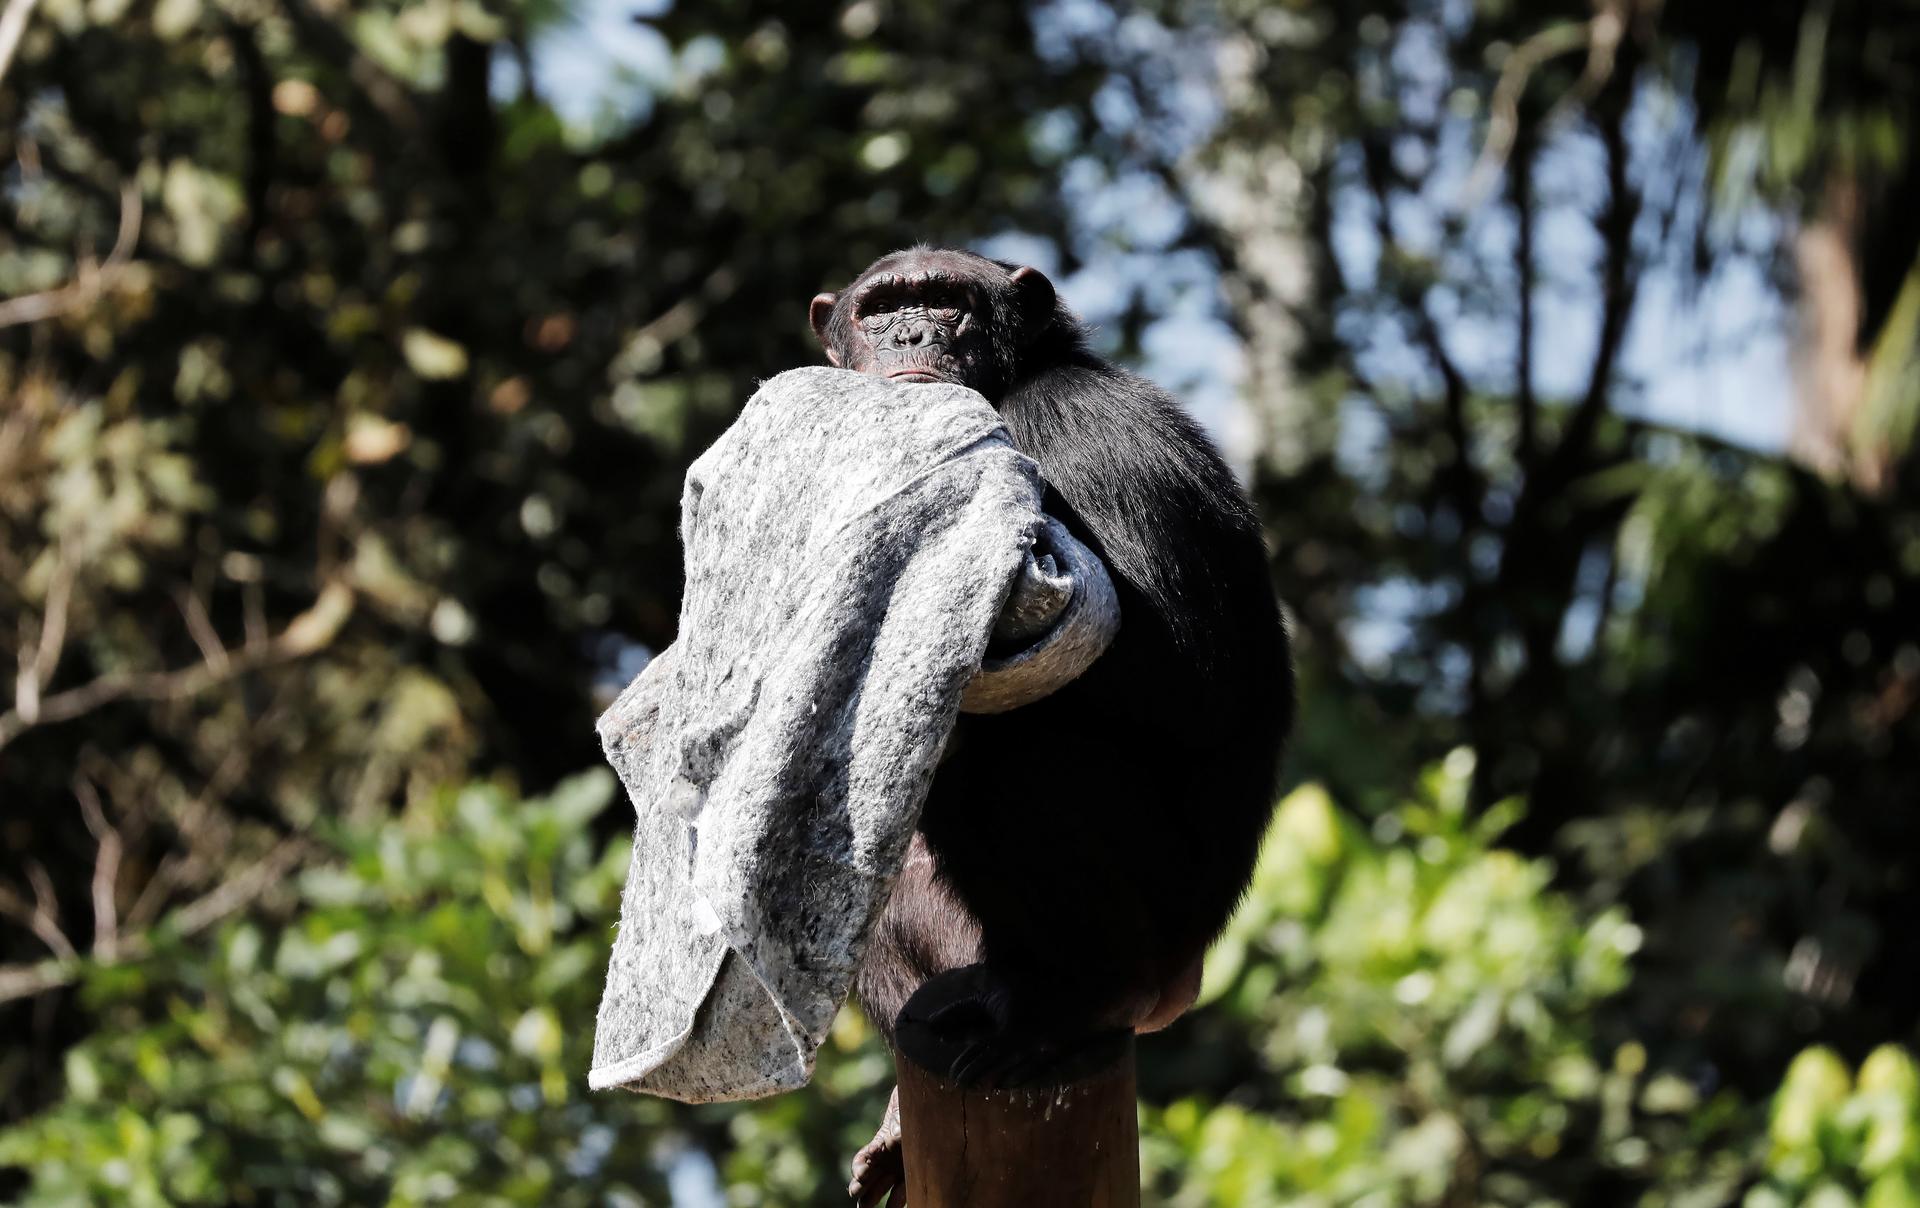 A chimpanzee holds a grey blanket up in a tree.